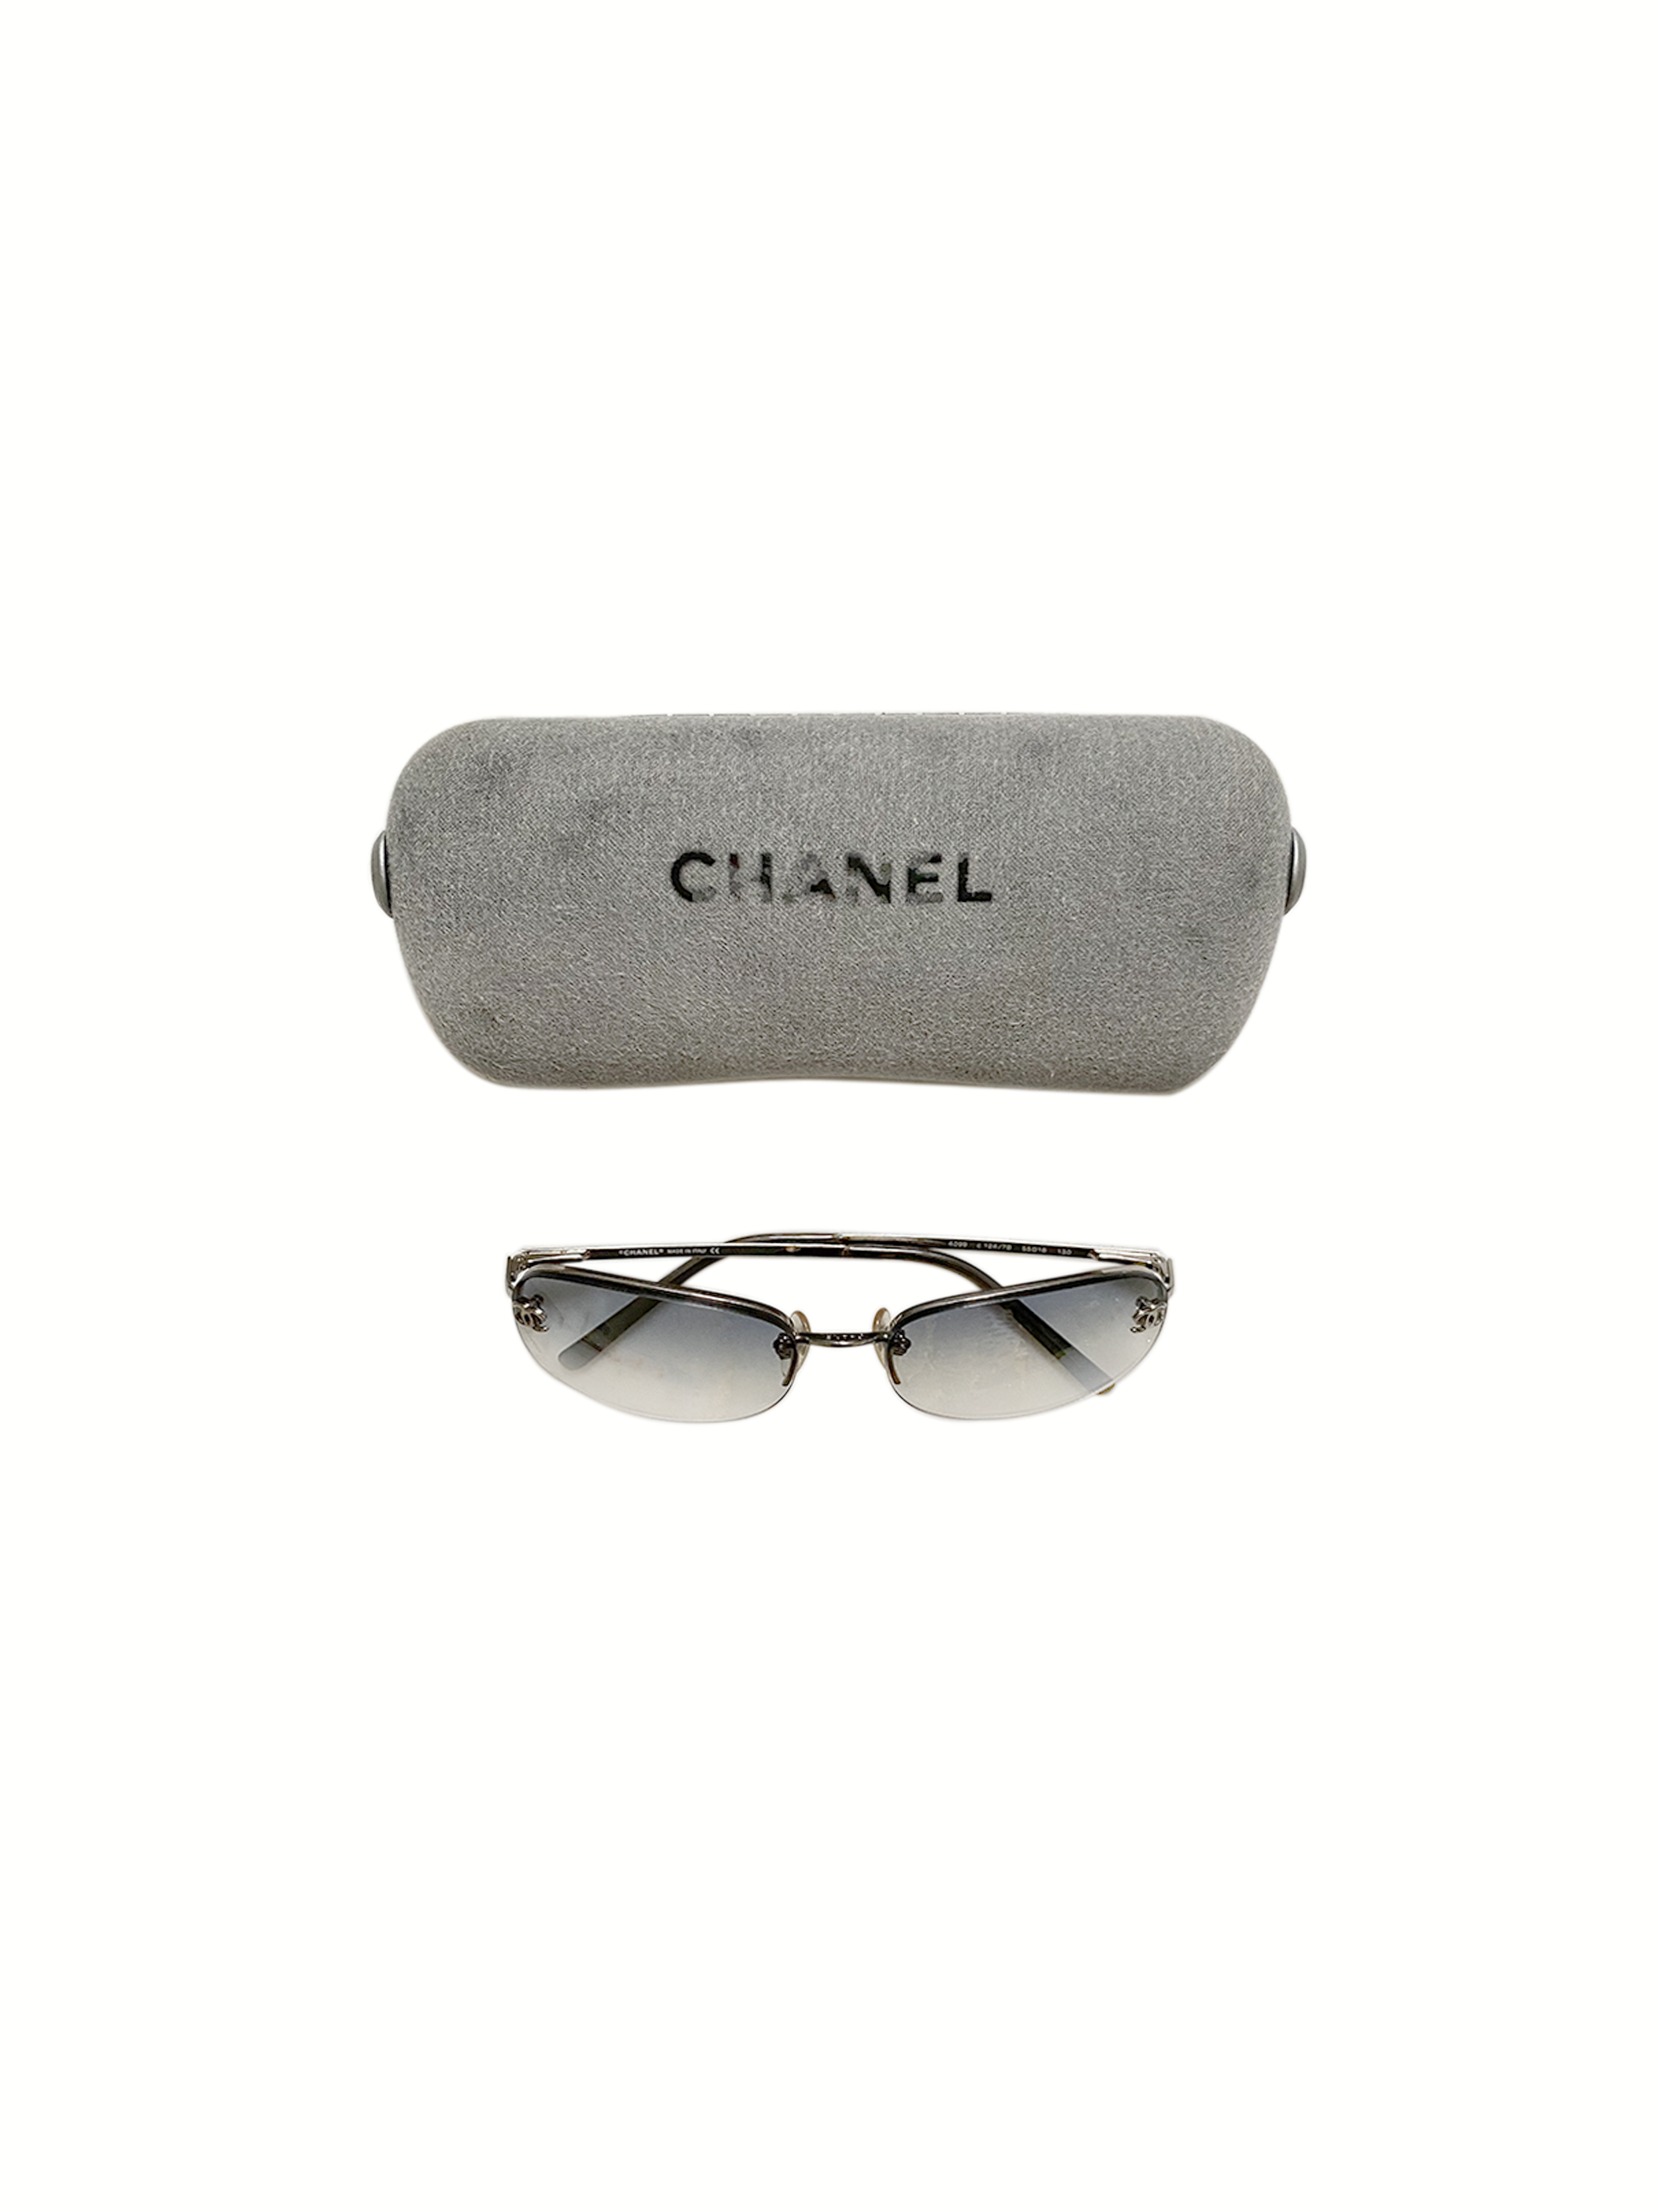 Chanel Round Blue Tinted Sunglasses